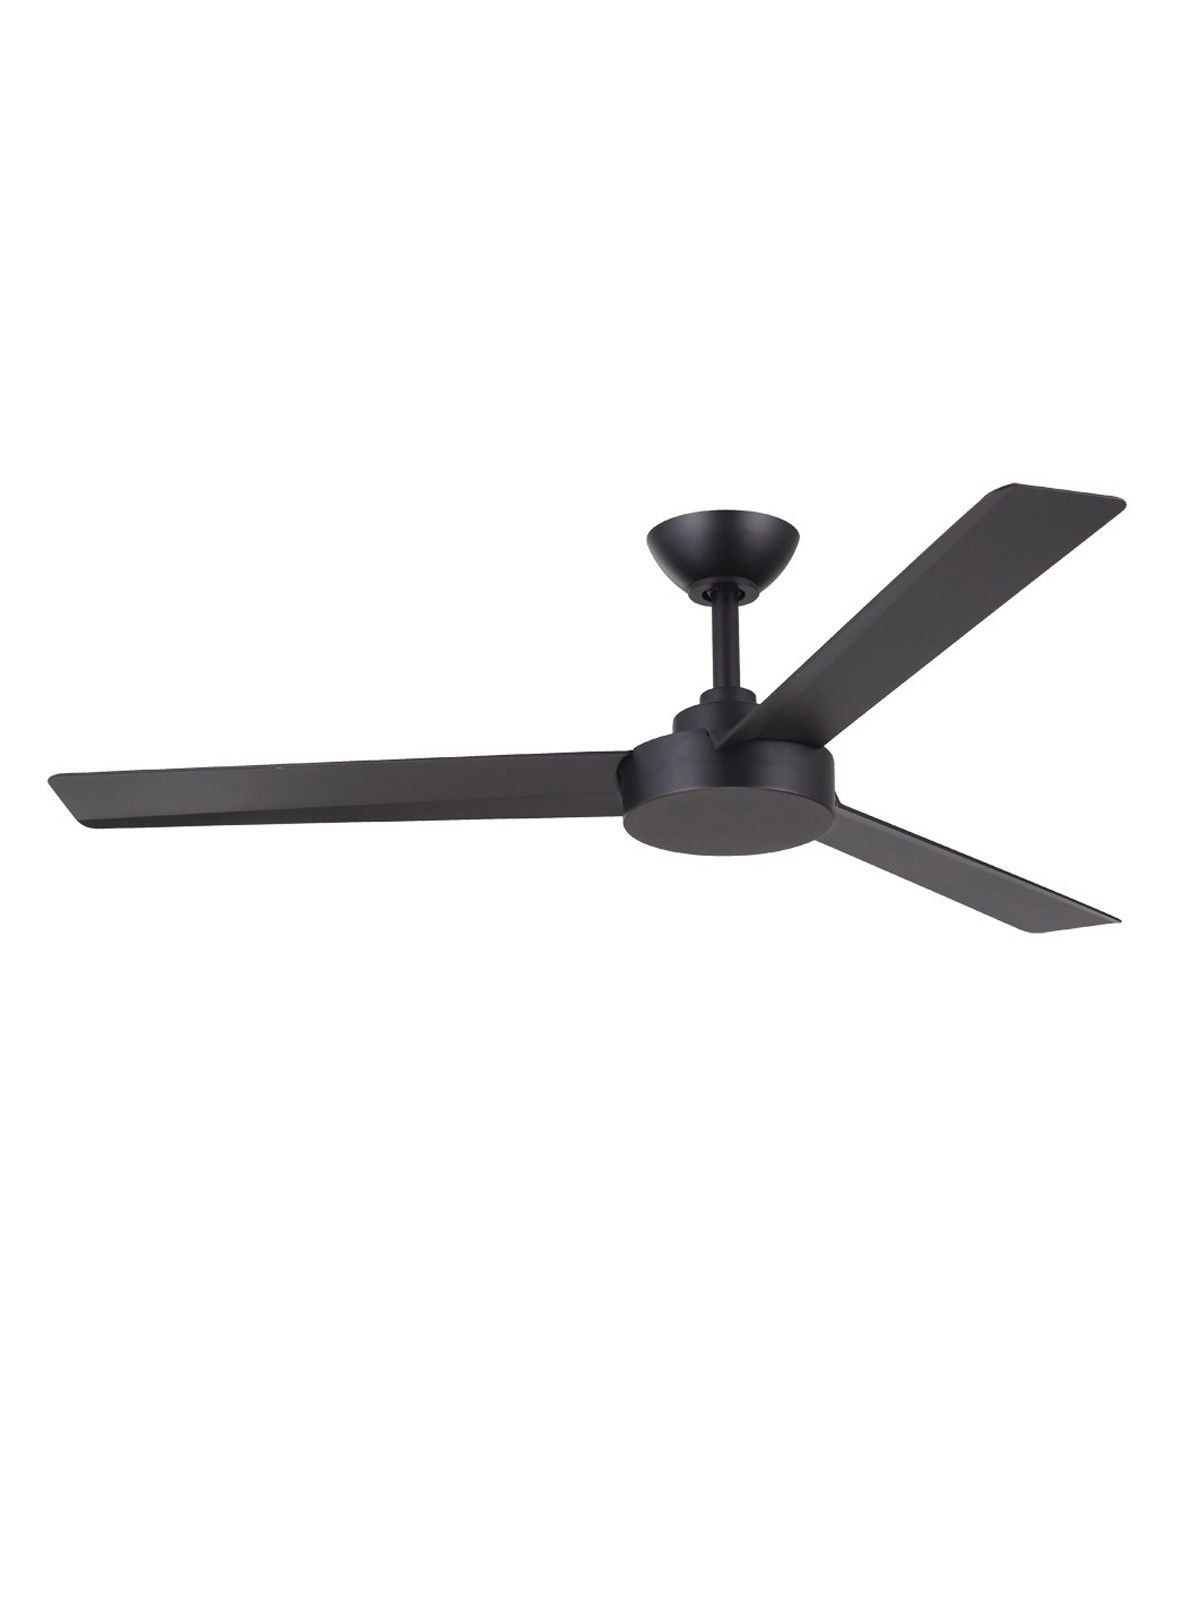 2019 Roto 3 Blade Ceiling Fans Intended For Roto 3 Blade Fan Only In Matt Black (Photo 5 of 20)